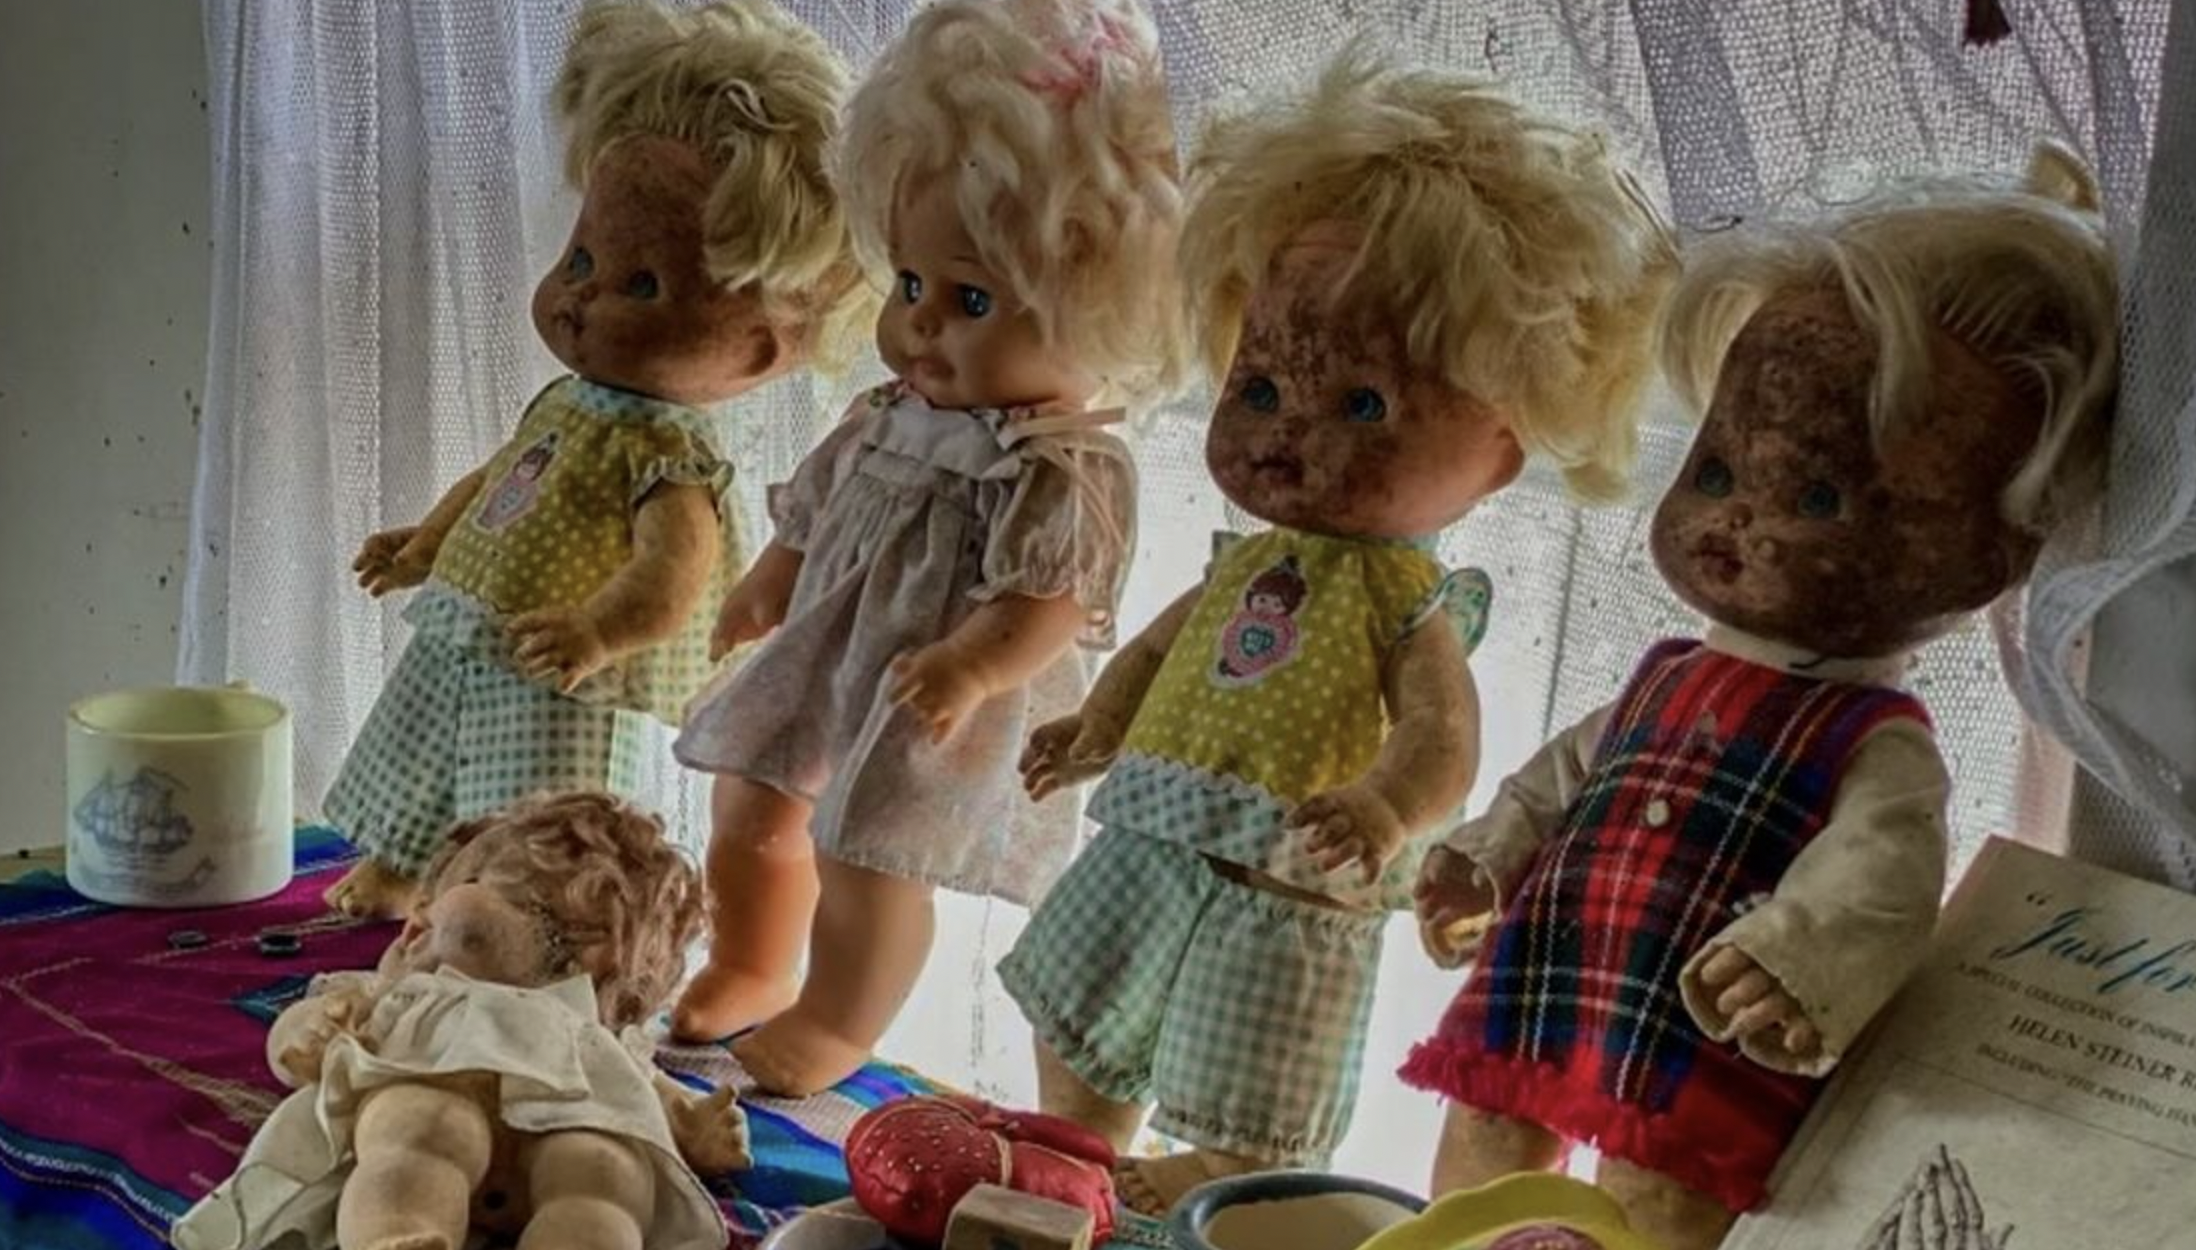 Inside twisted serial killer’s abandoned home containing creepy dolls